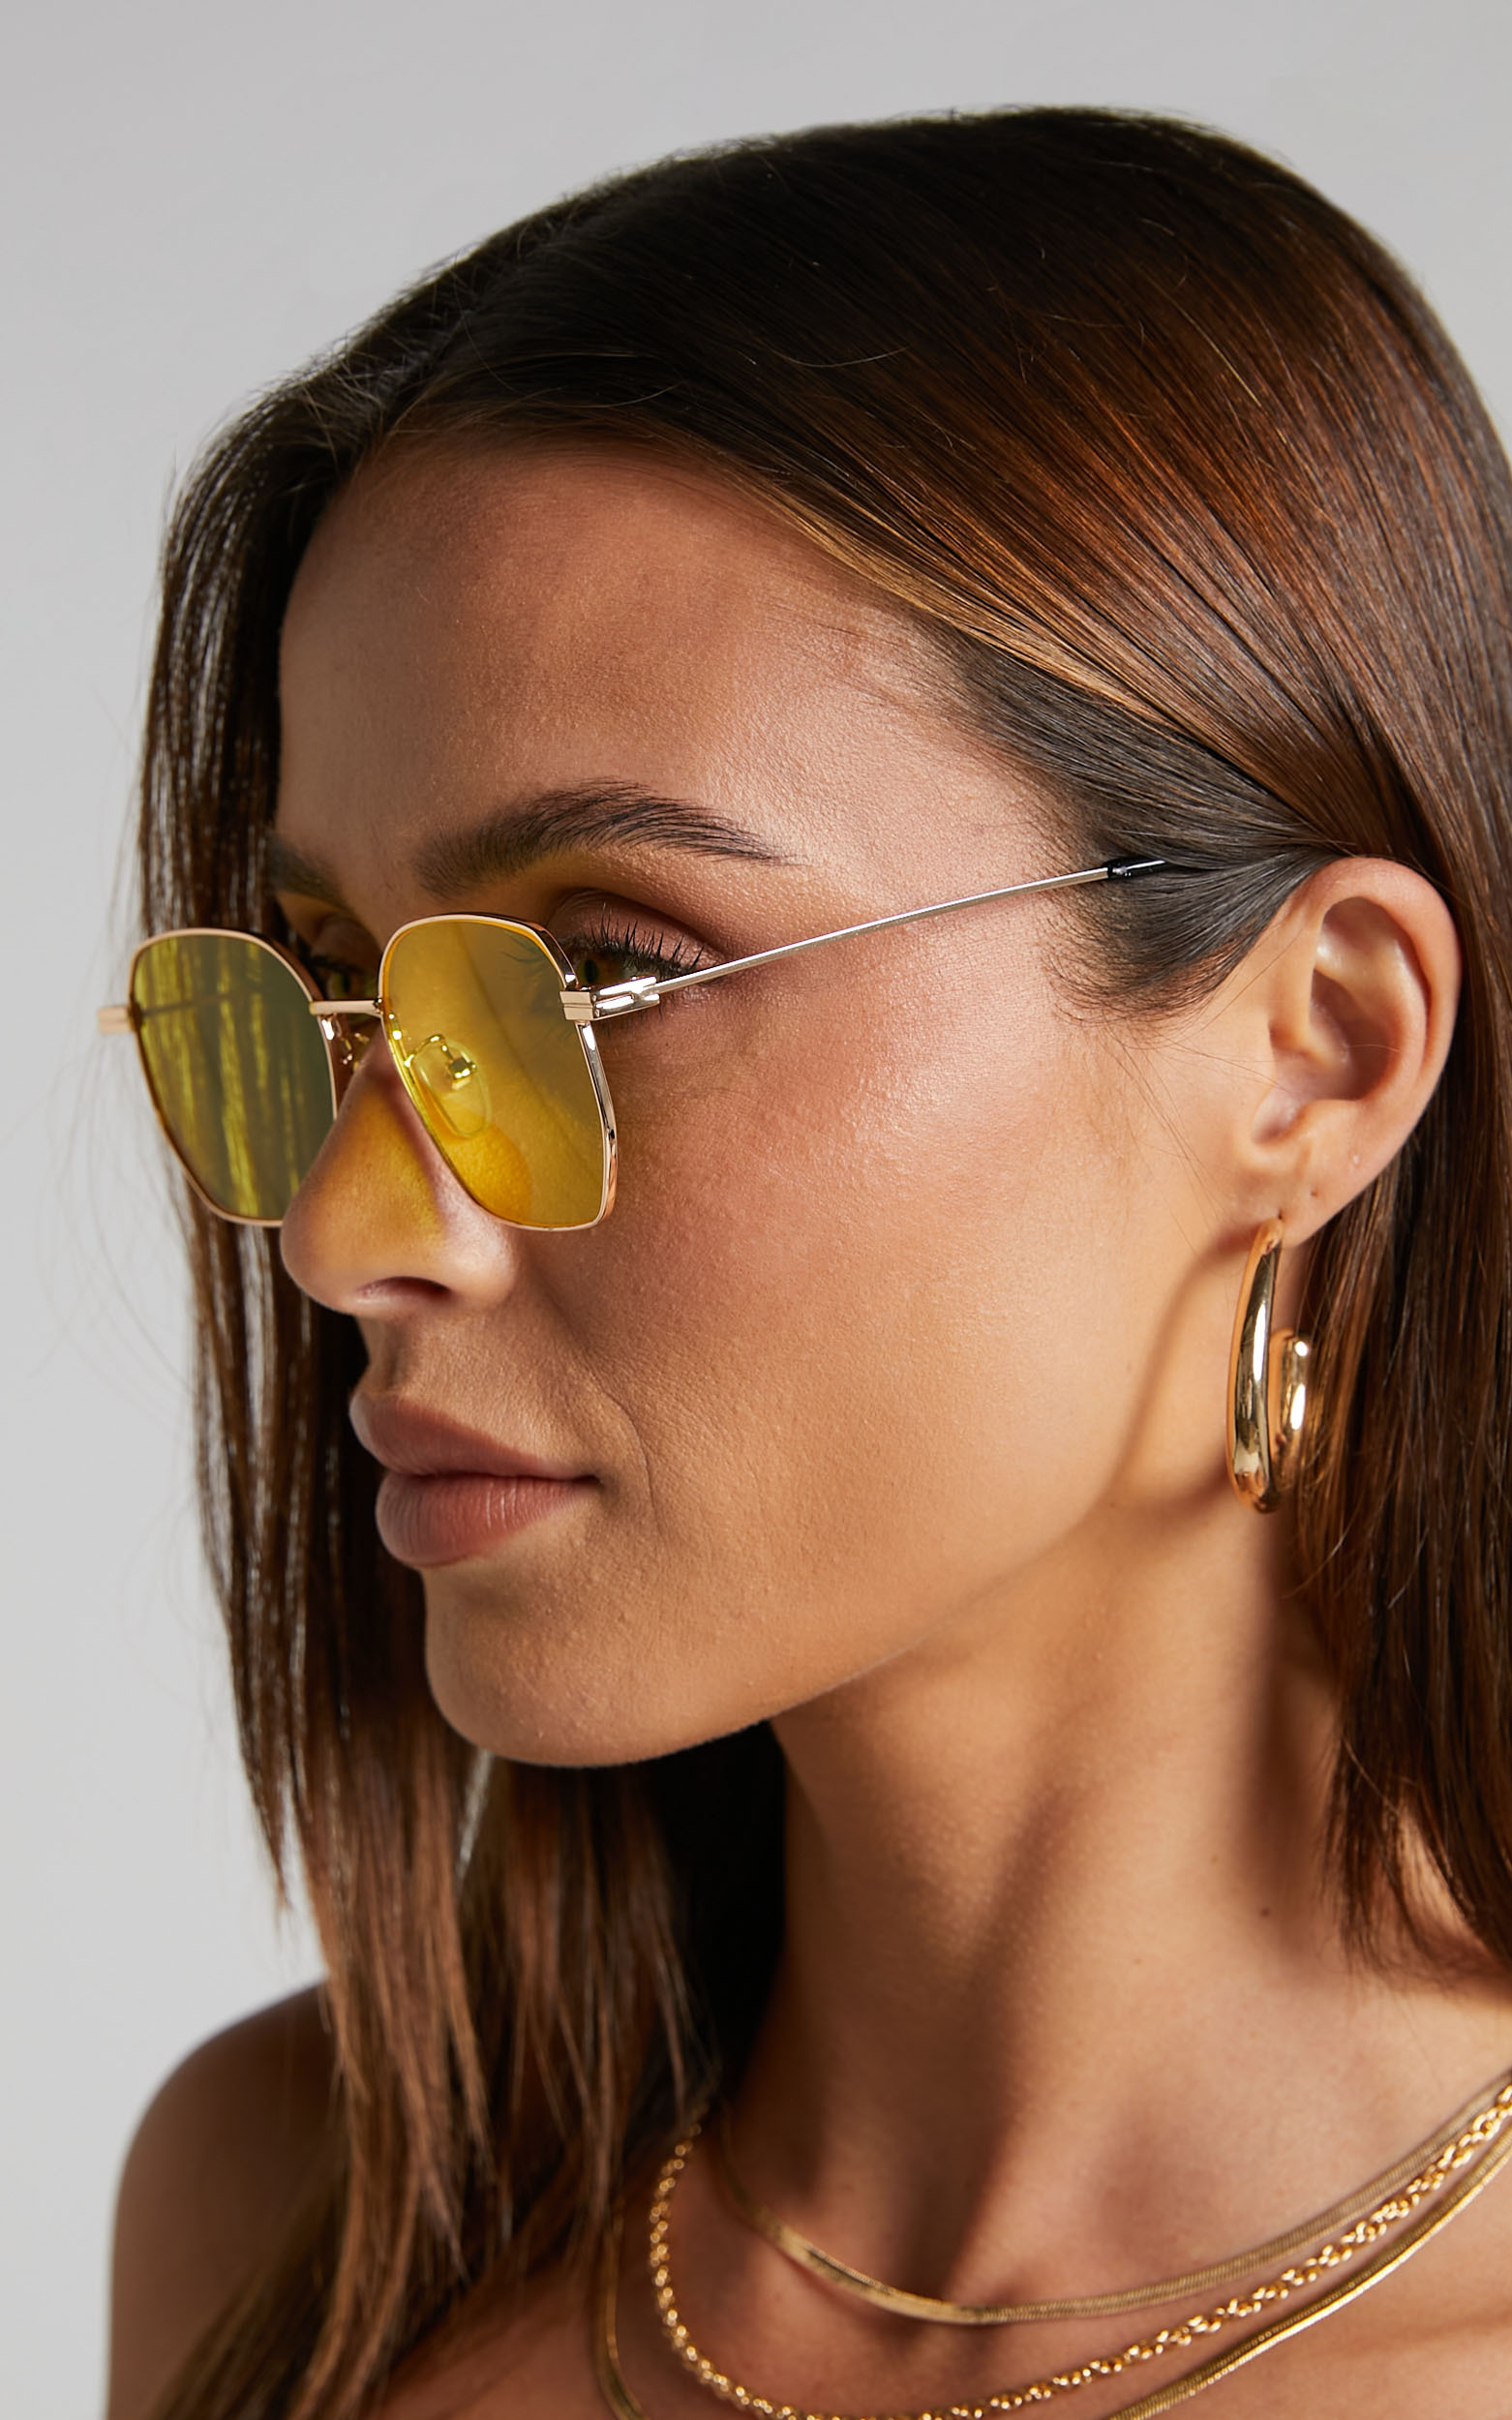 Caoimhe Hexagonal Sunglasses in Yellow Lens - NoSize, YEL2, hi-res image number null